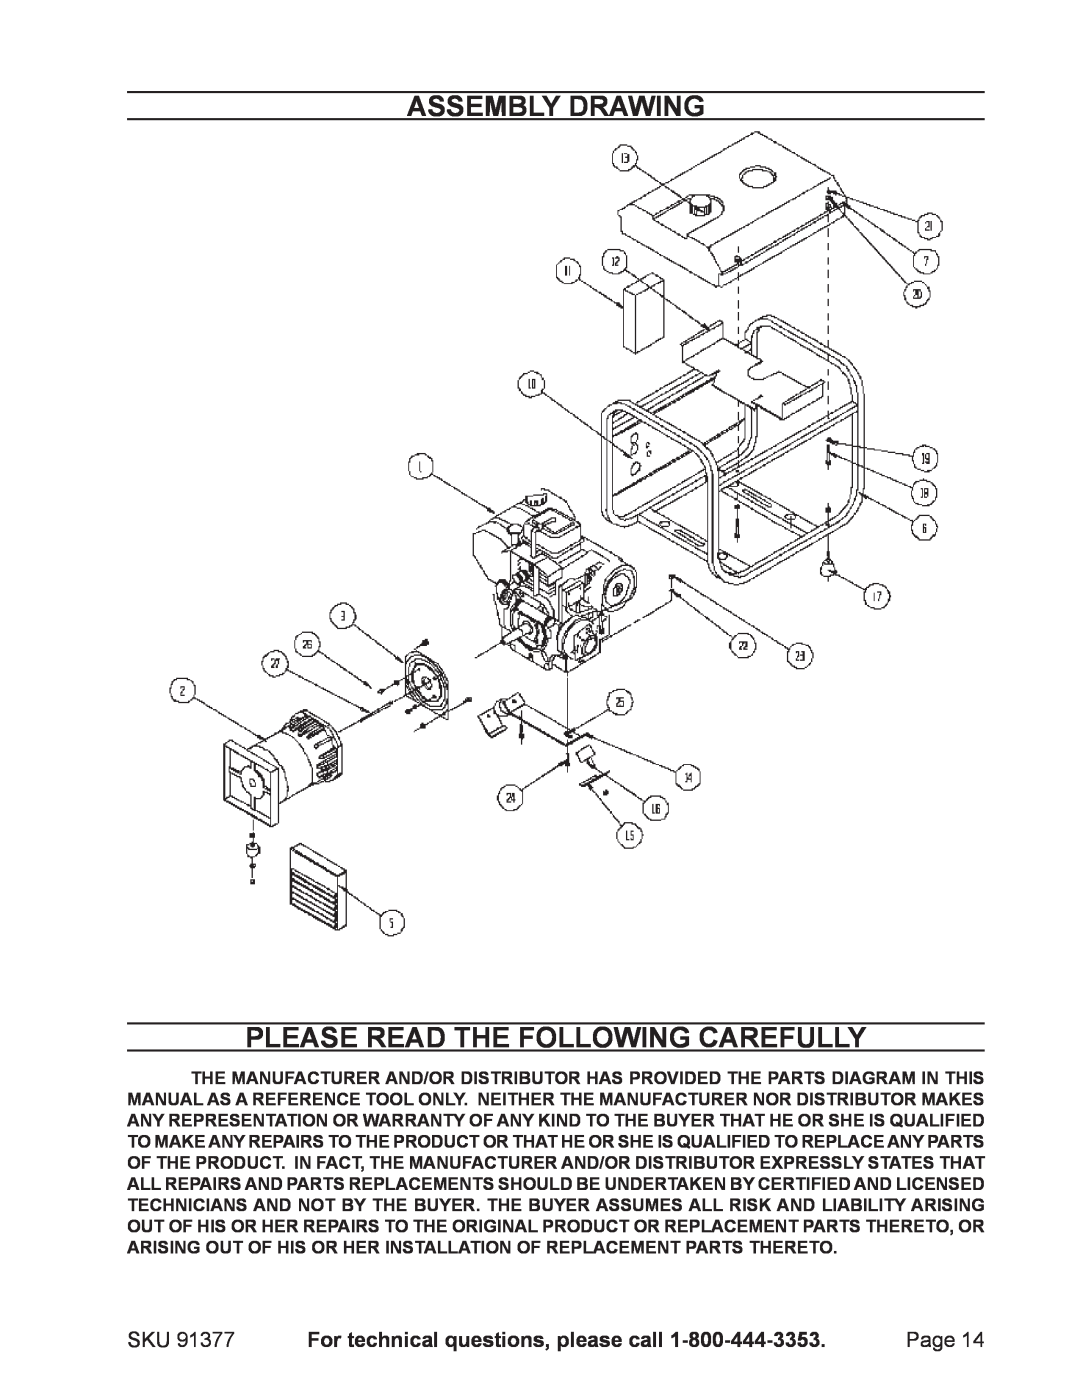 Harbor Freight Tools 91377 manual Assembly Drawing, Please Read The Following Carefully 